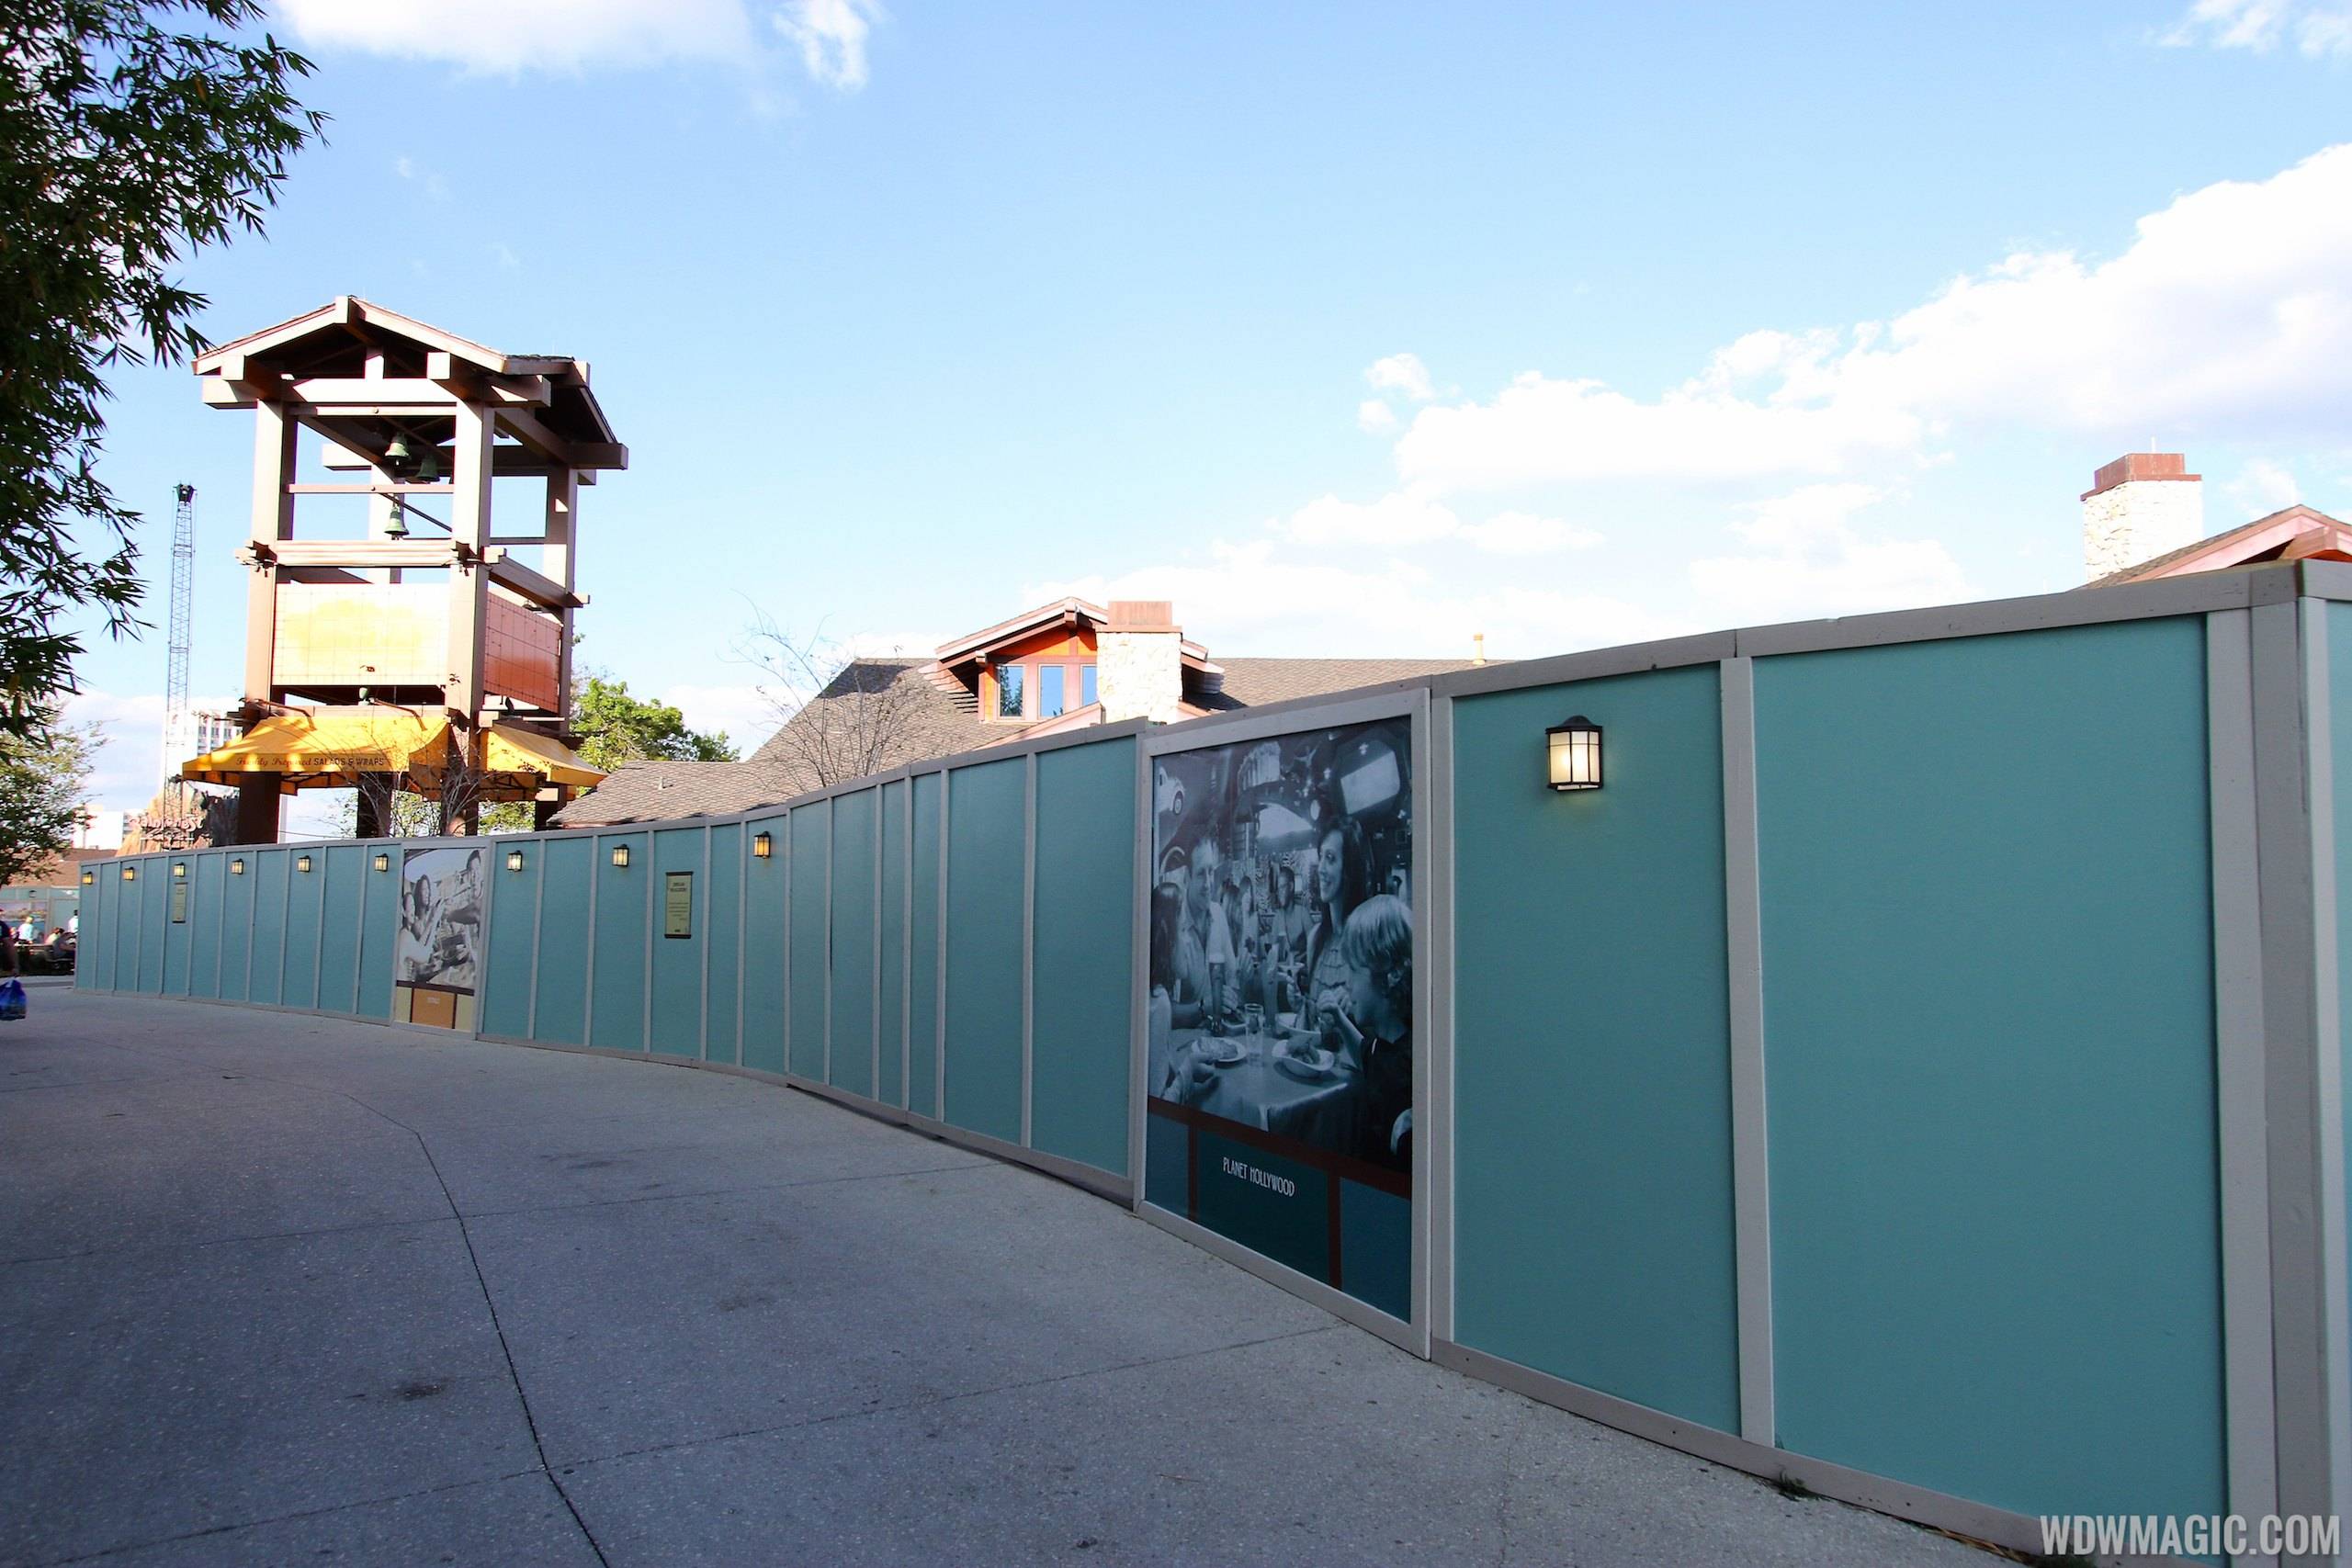 Construction walls up around Pollo Campero and parts of parking lot E, F, G